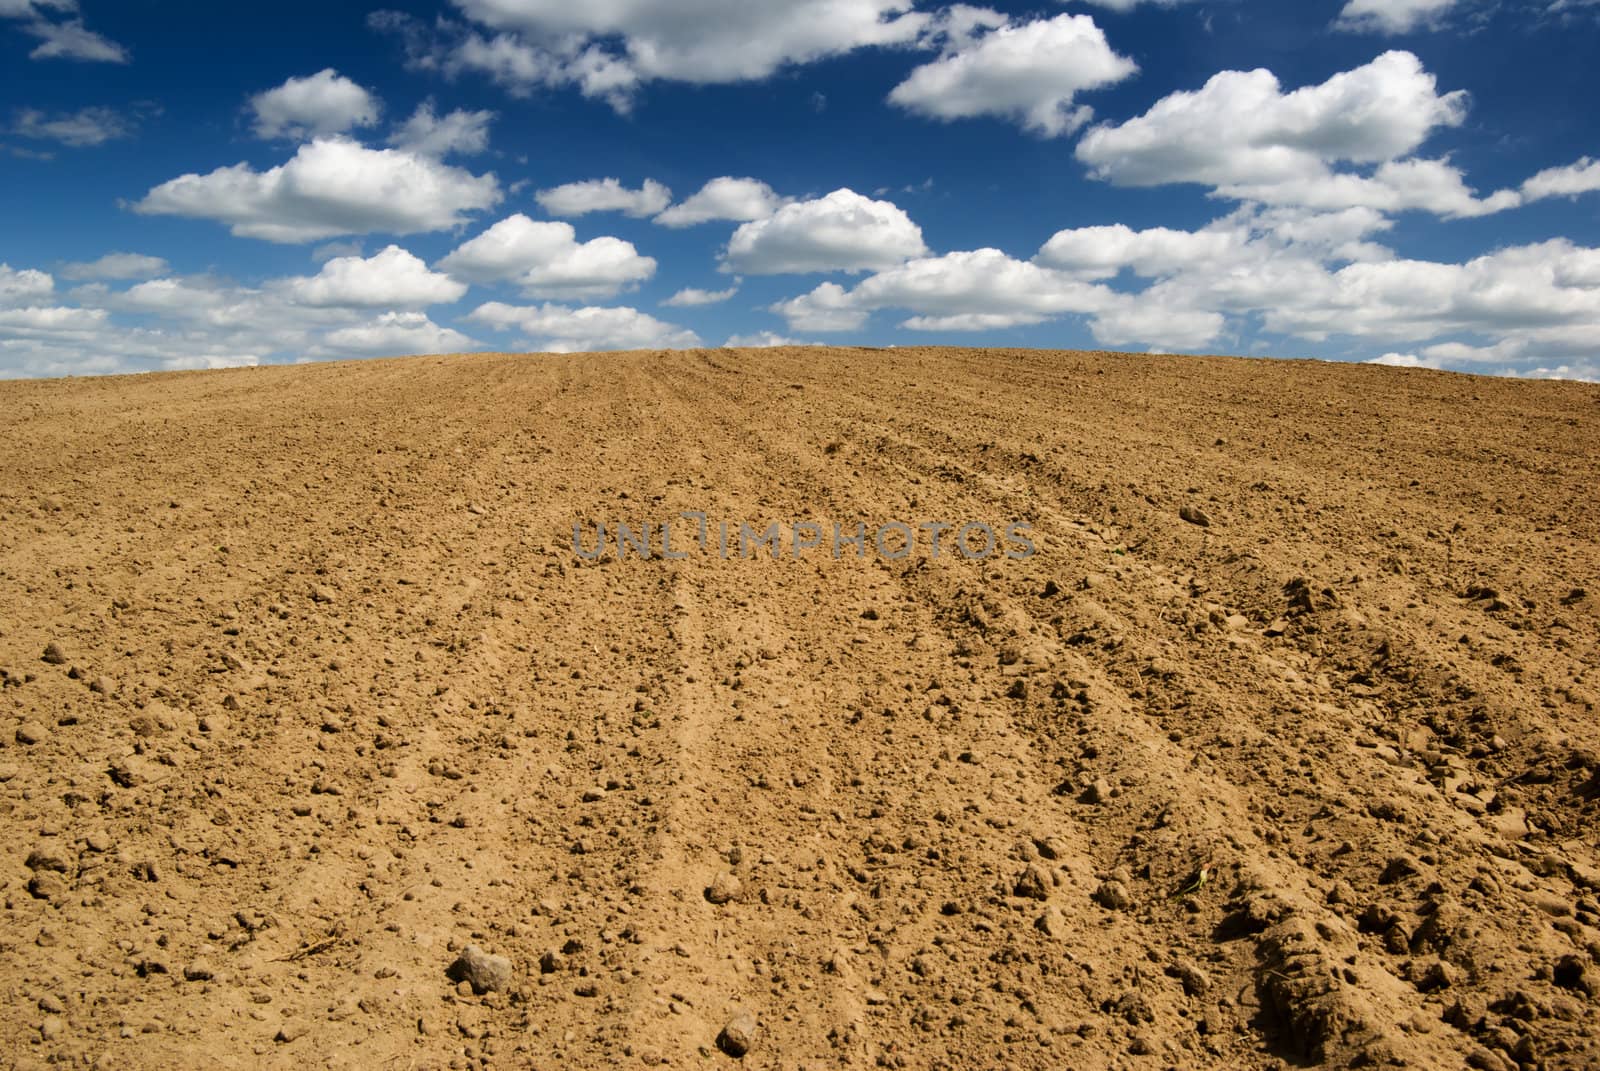 Blue sky with clouds over ploughed field.